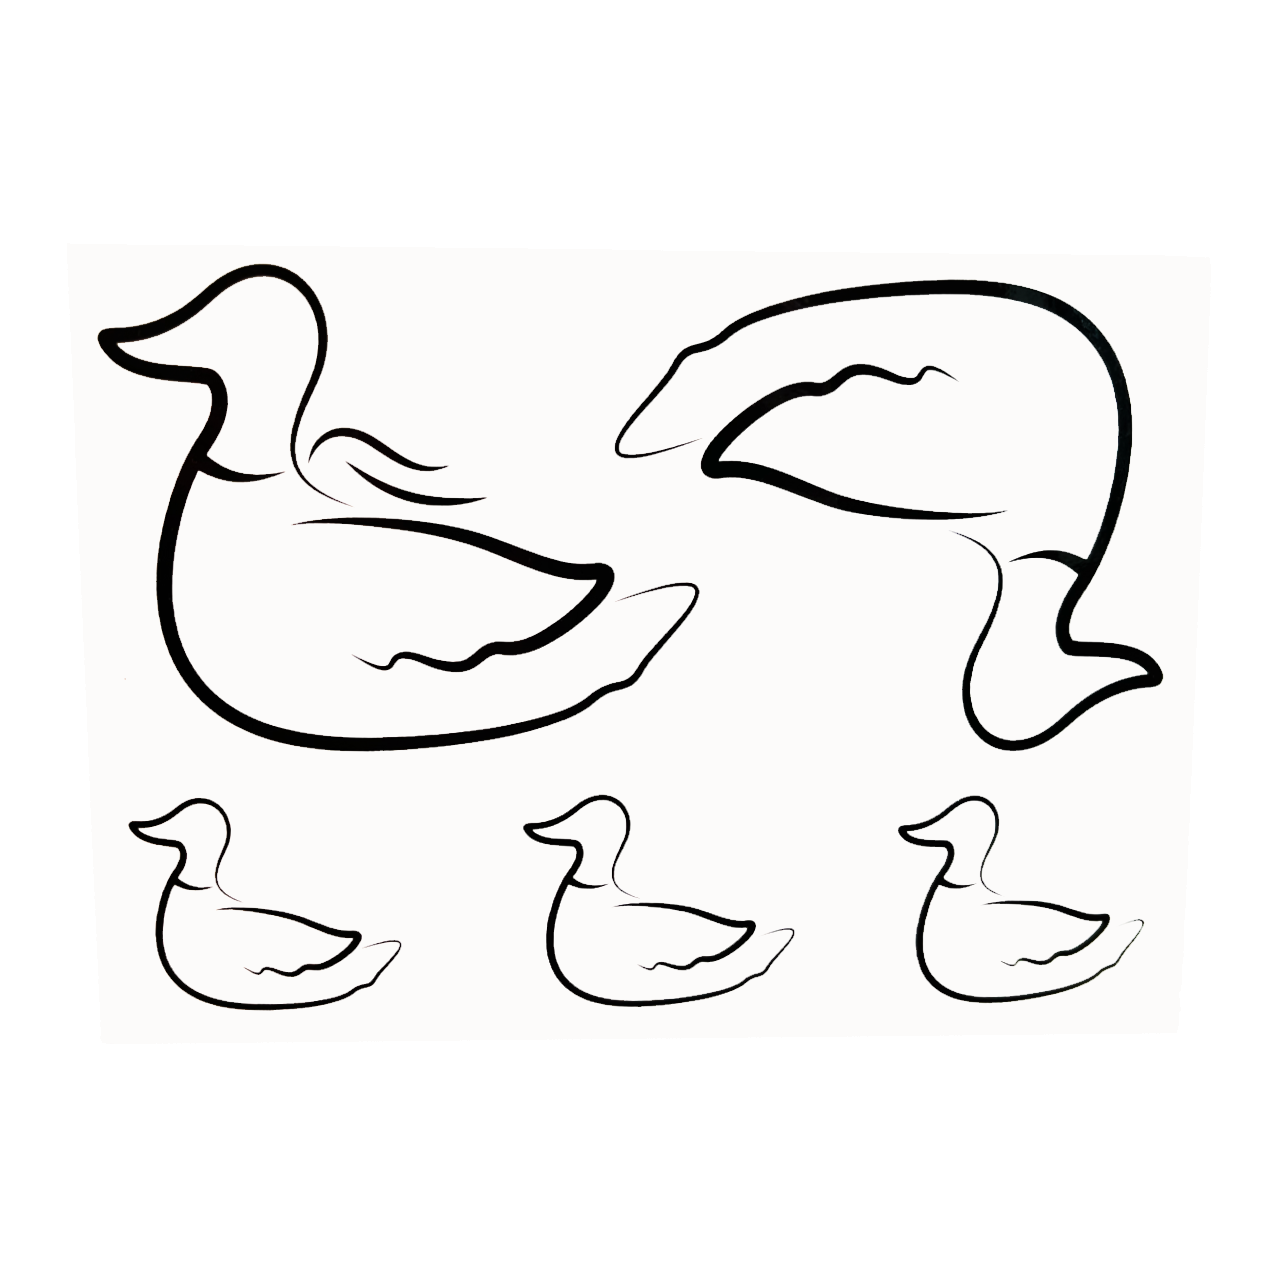 How To Draw A Duck Family 